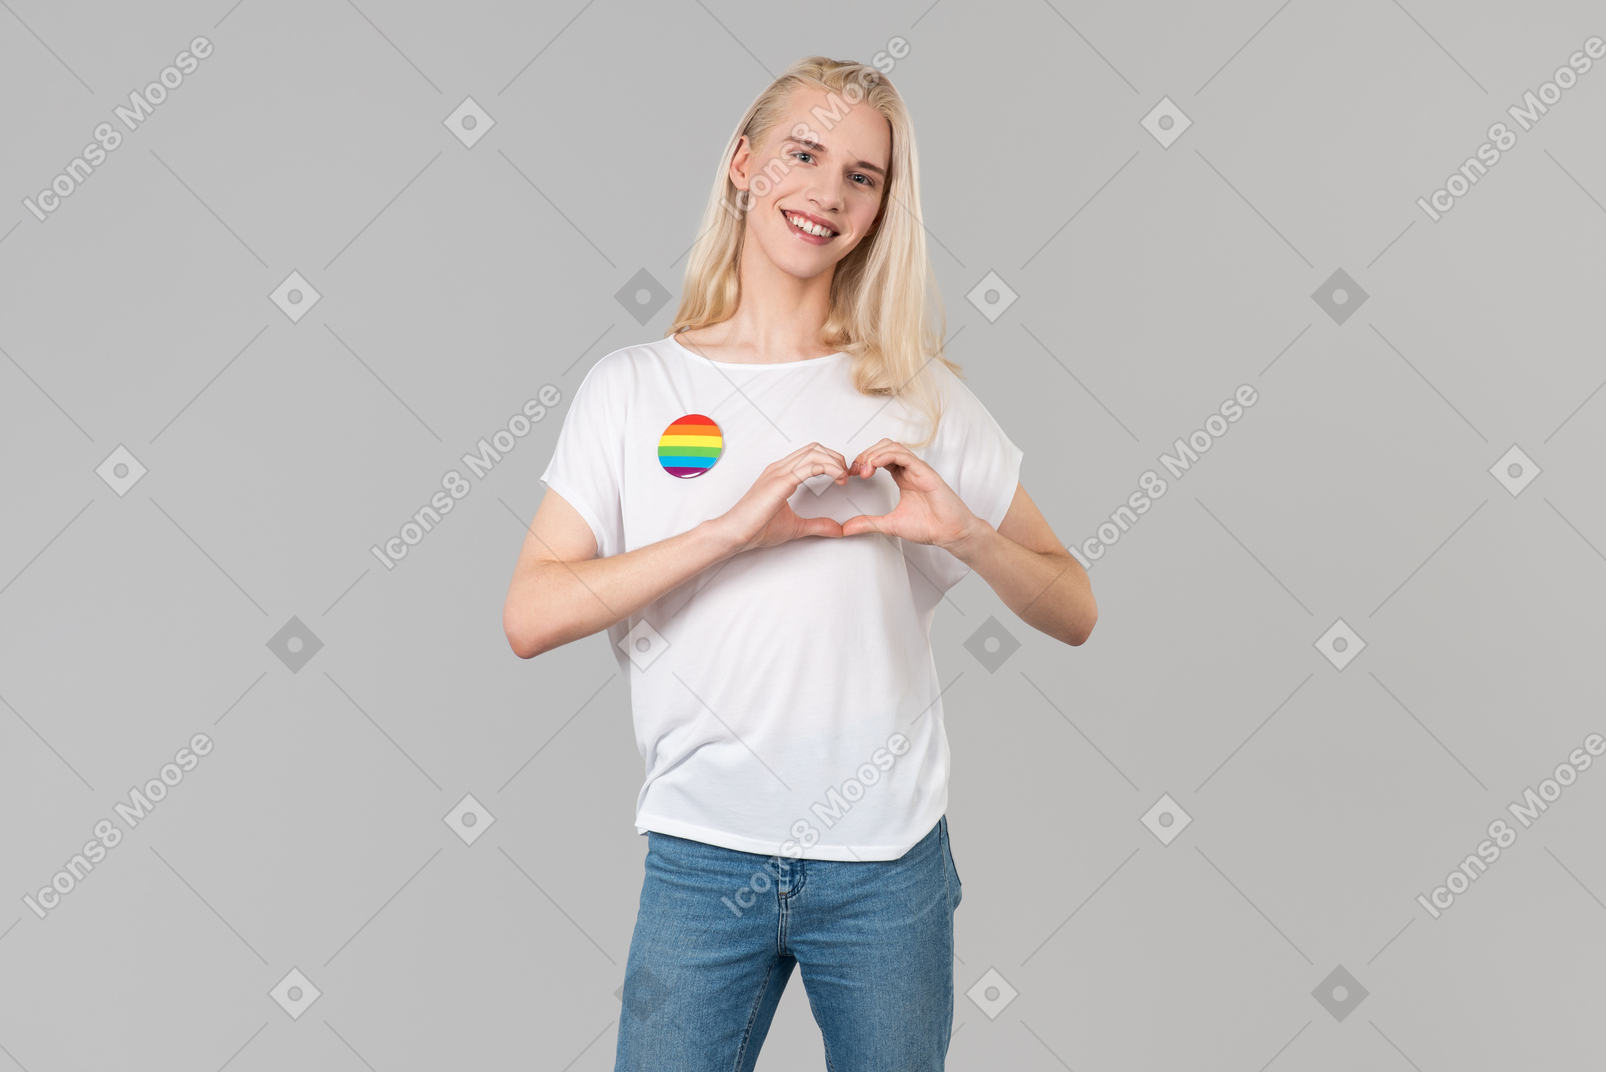 Good-looking young man with long blond hair, standing against grey background, wearing blue jeans and a white t-shirt with lgbt badge on it